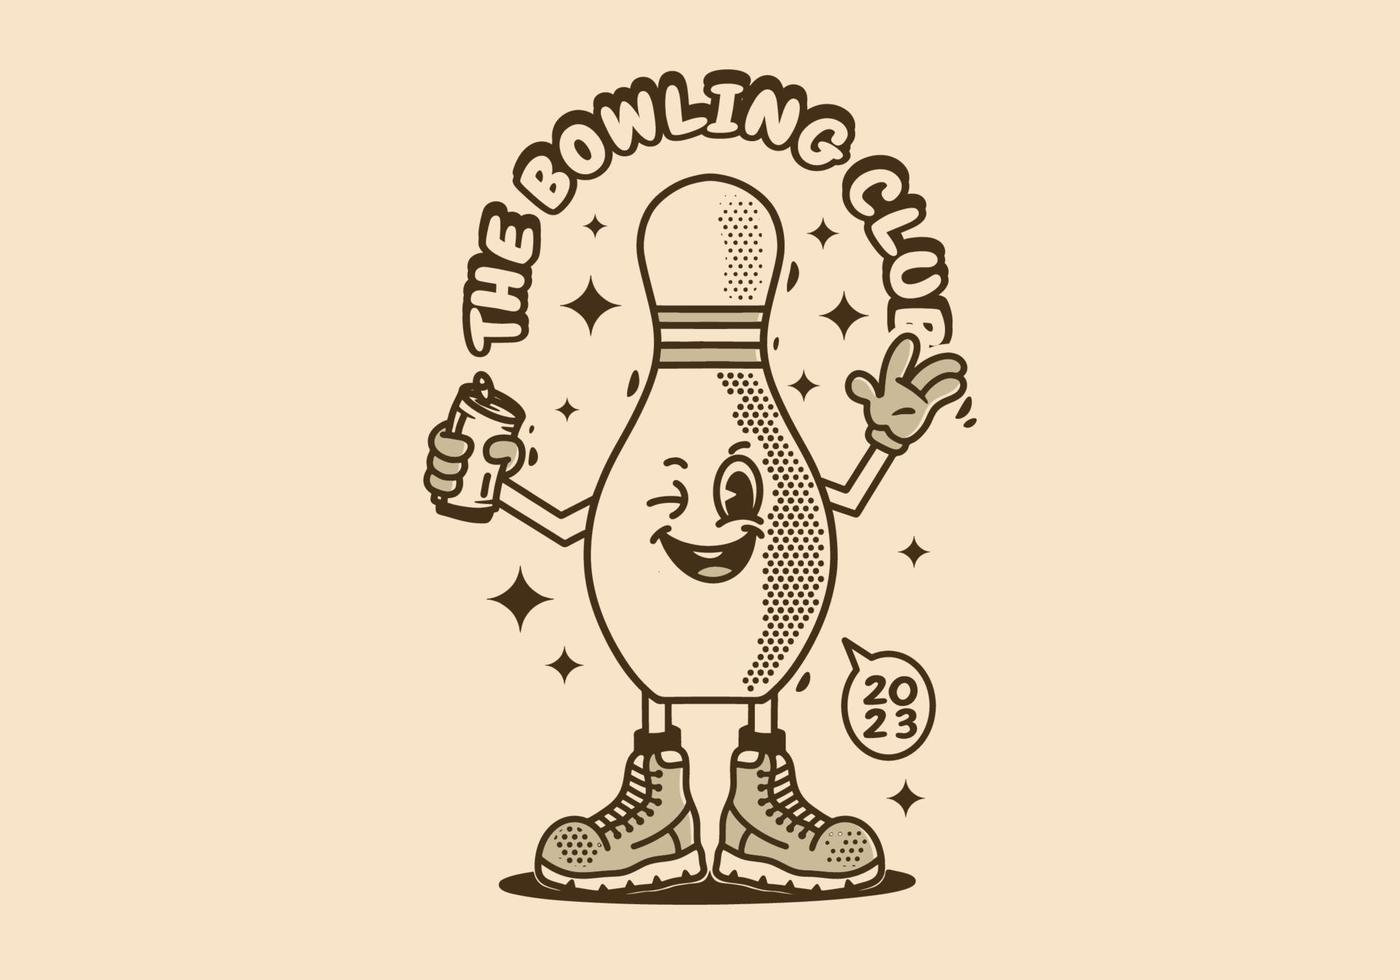 Character design of a bowling pin holding a beer can vector